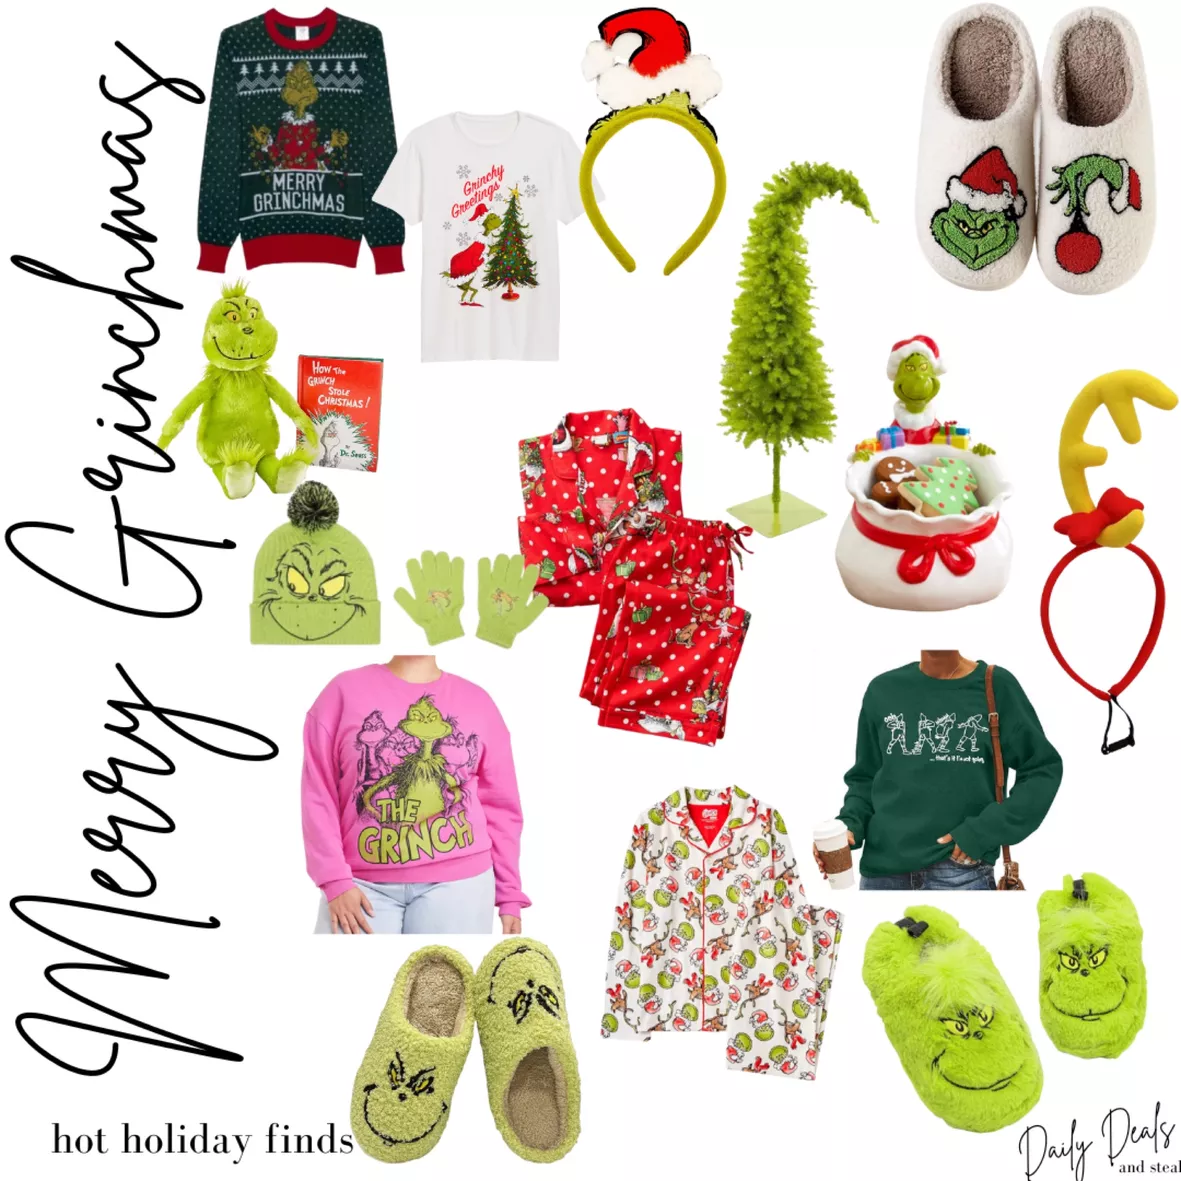 How the Grinch Stole Christmas – Red Barn Collections